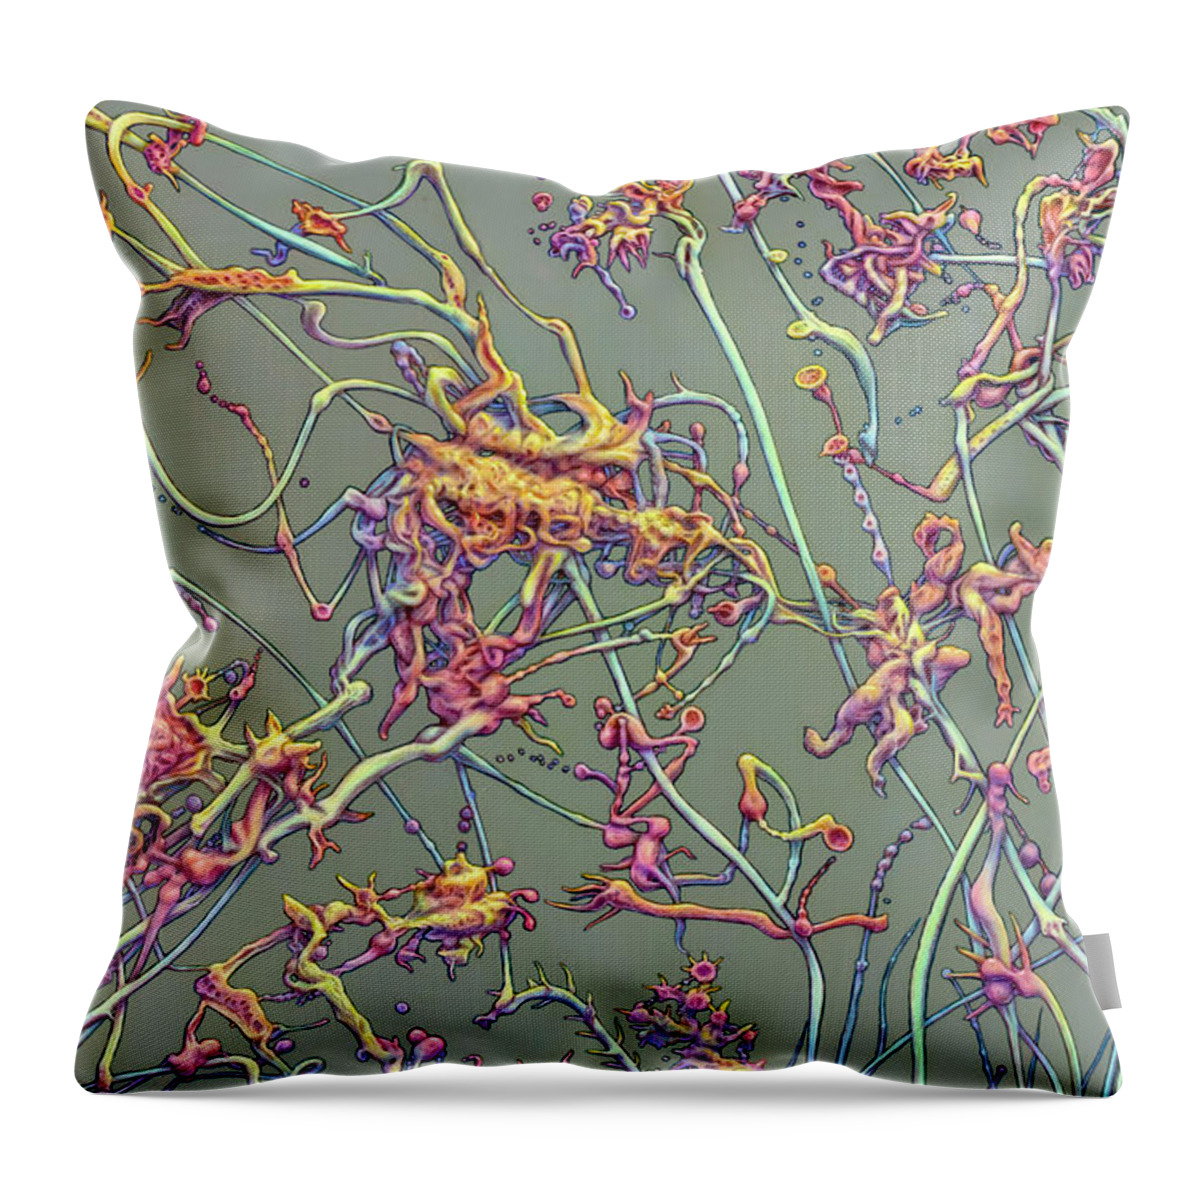 Growth Throw Pillow featuring the painting Growth by James W Johnson